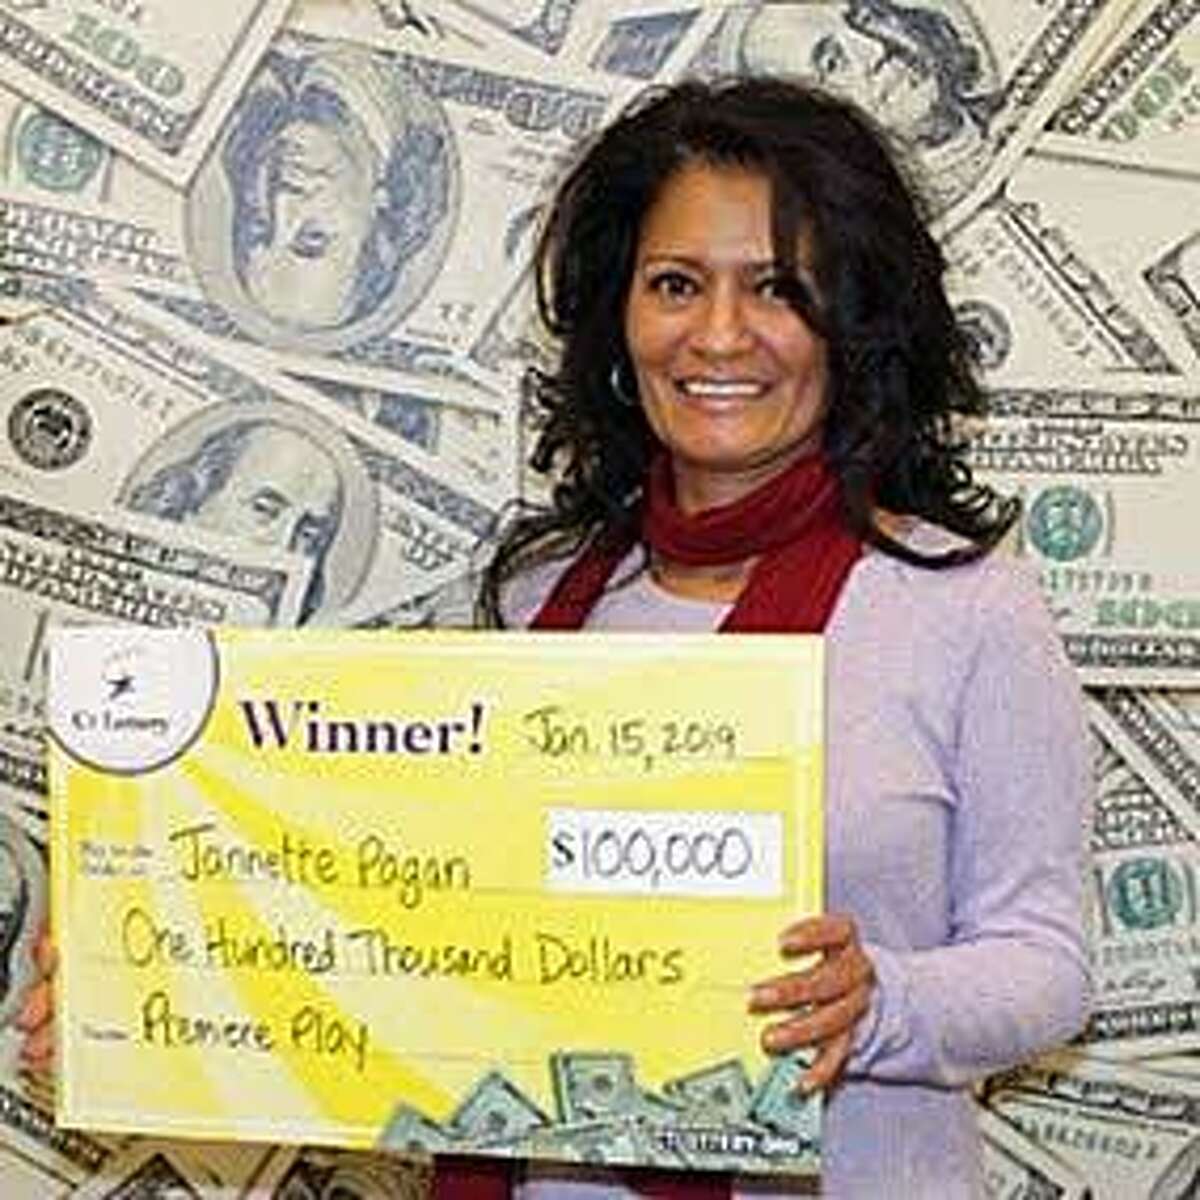 Jannette Pagan of Bridgeport won $100,000 on a Premiere Play scratch ticket bought at Grocery Village in Bridgeport. Pagan said she will use the prize money to pay off the mortgage on her house - years earlier than planned.